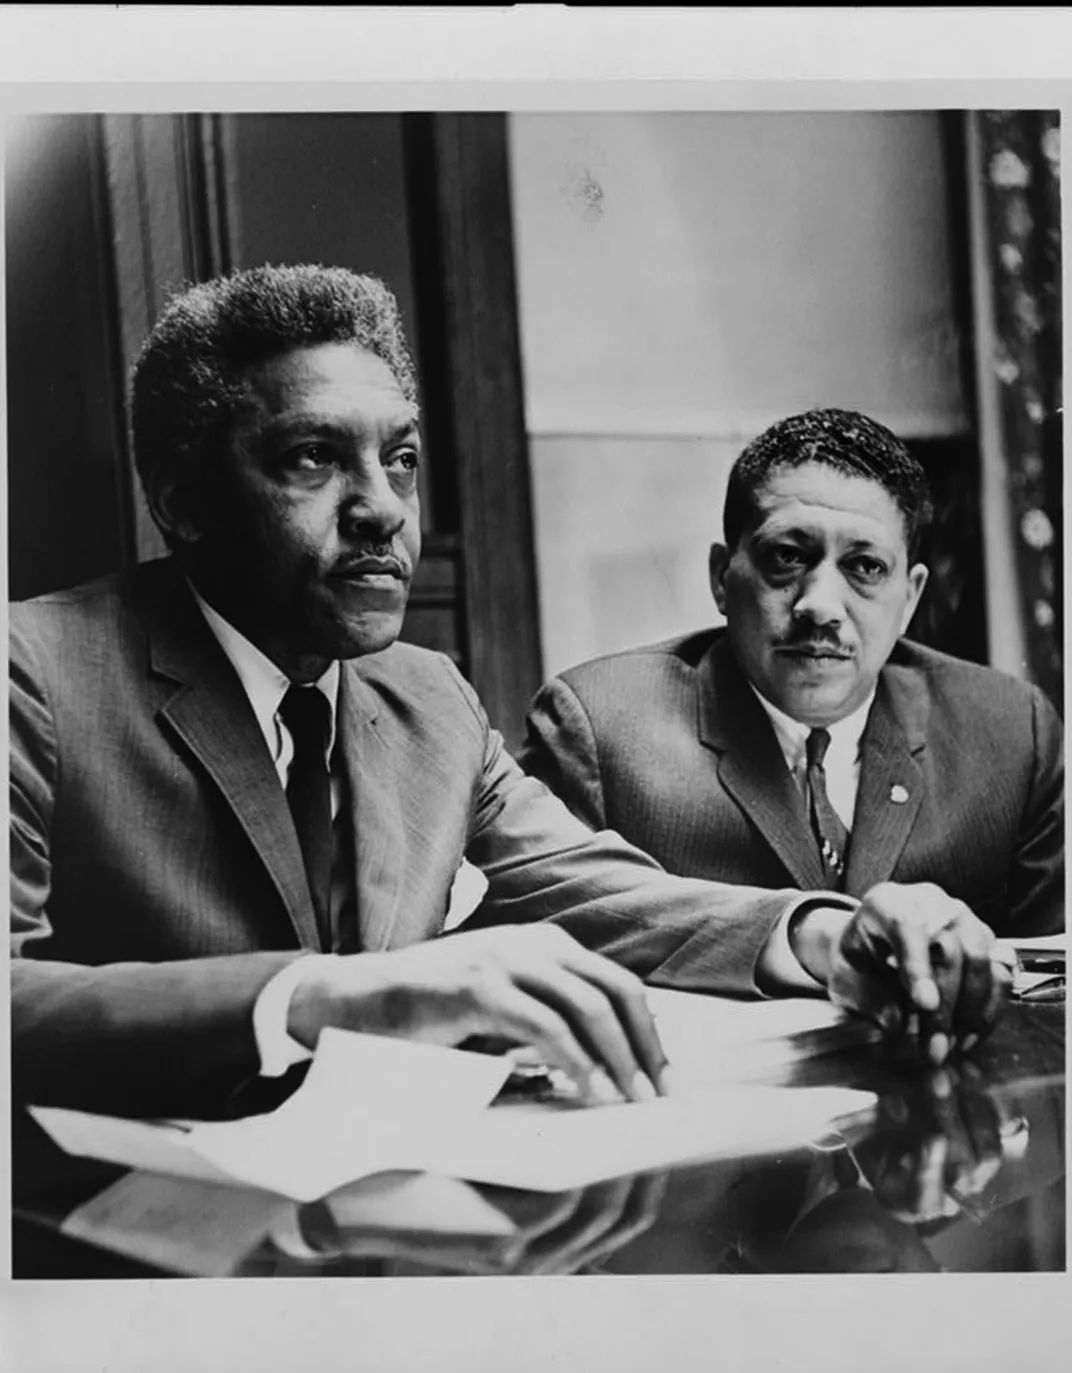 Rustin (left) and Eugene Reed in 1964